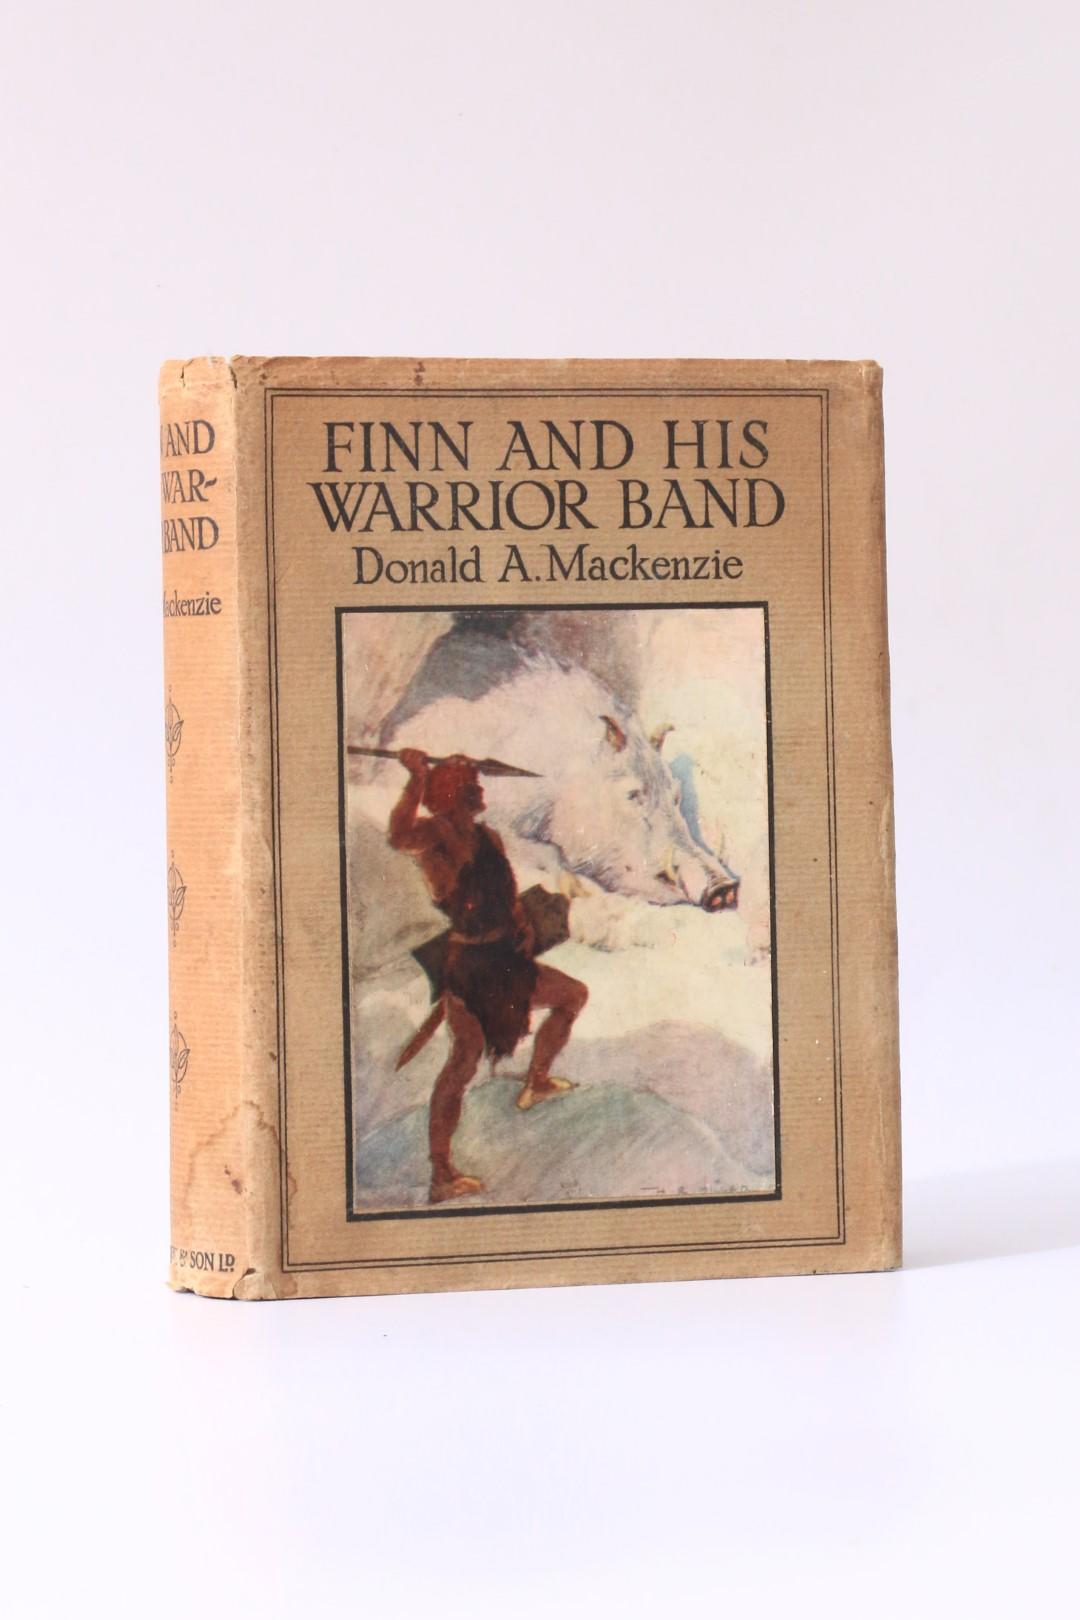 Donald A. Mackenzie - Finn and his Warrior Band - Blacket & Son, 1911, First Edition.